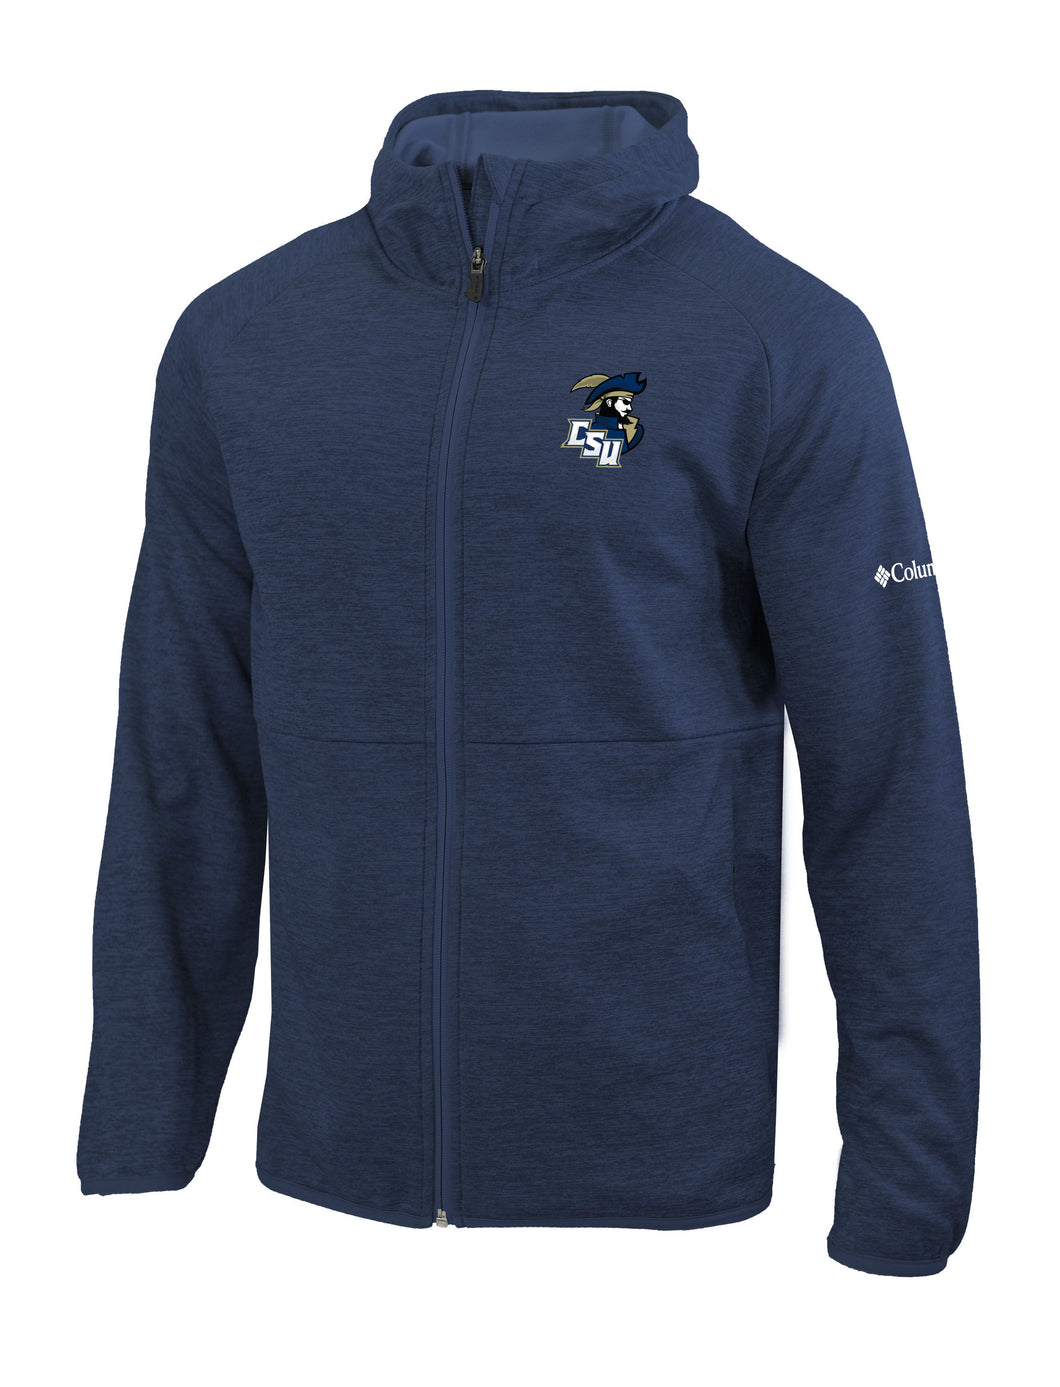 Omni-Wick It's Time Full Zip Jacket by Columbia, Navy (F22)